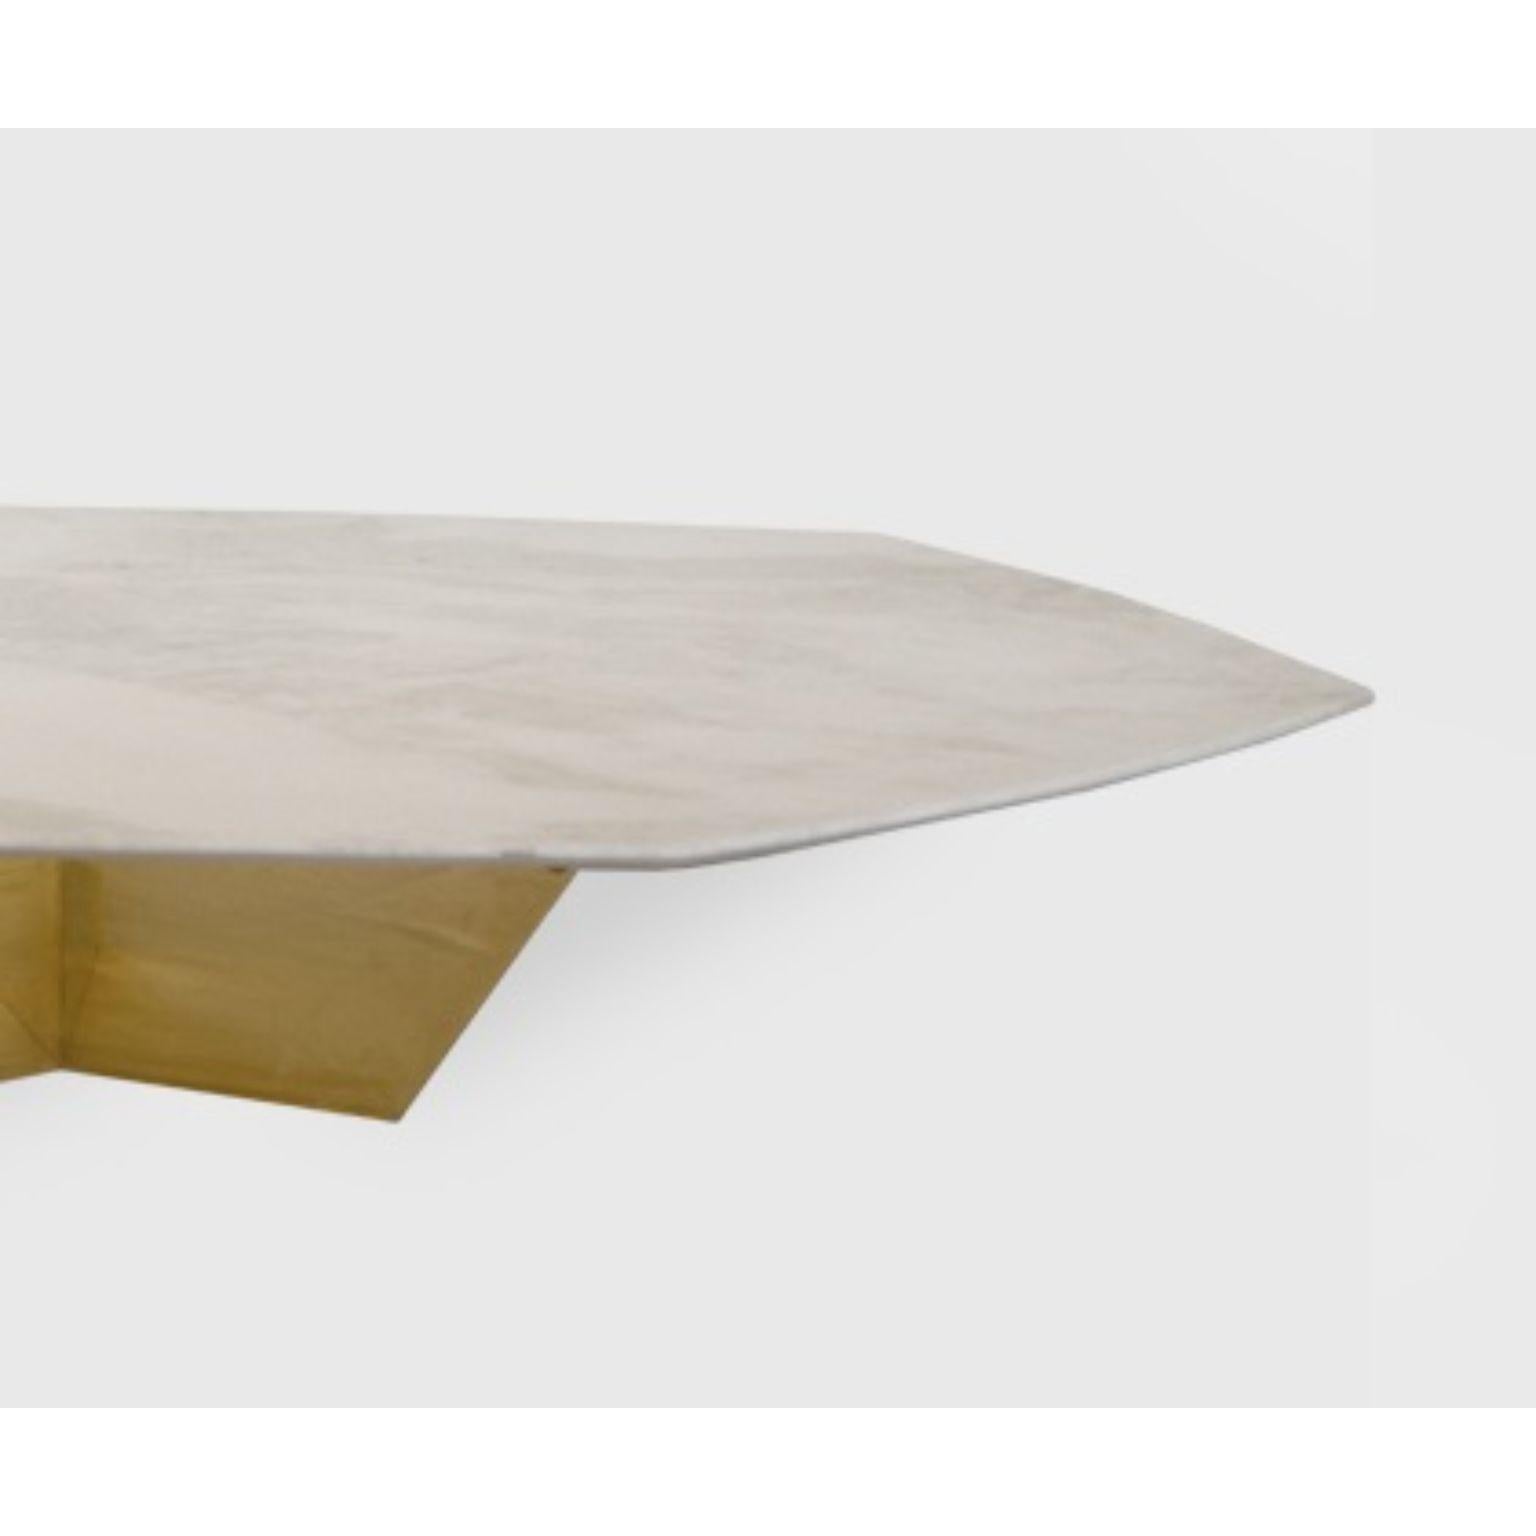 Post-Modern Geometrik Cristallo Stone and Brass Large Coffee Table by Atra Design For Sale